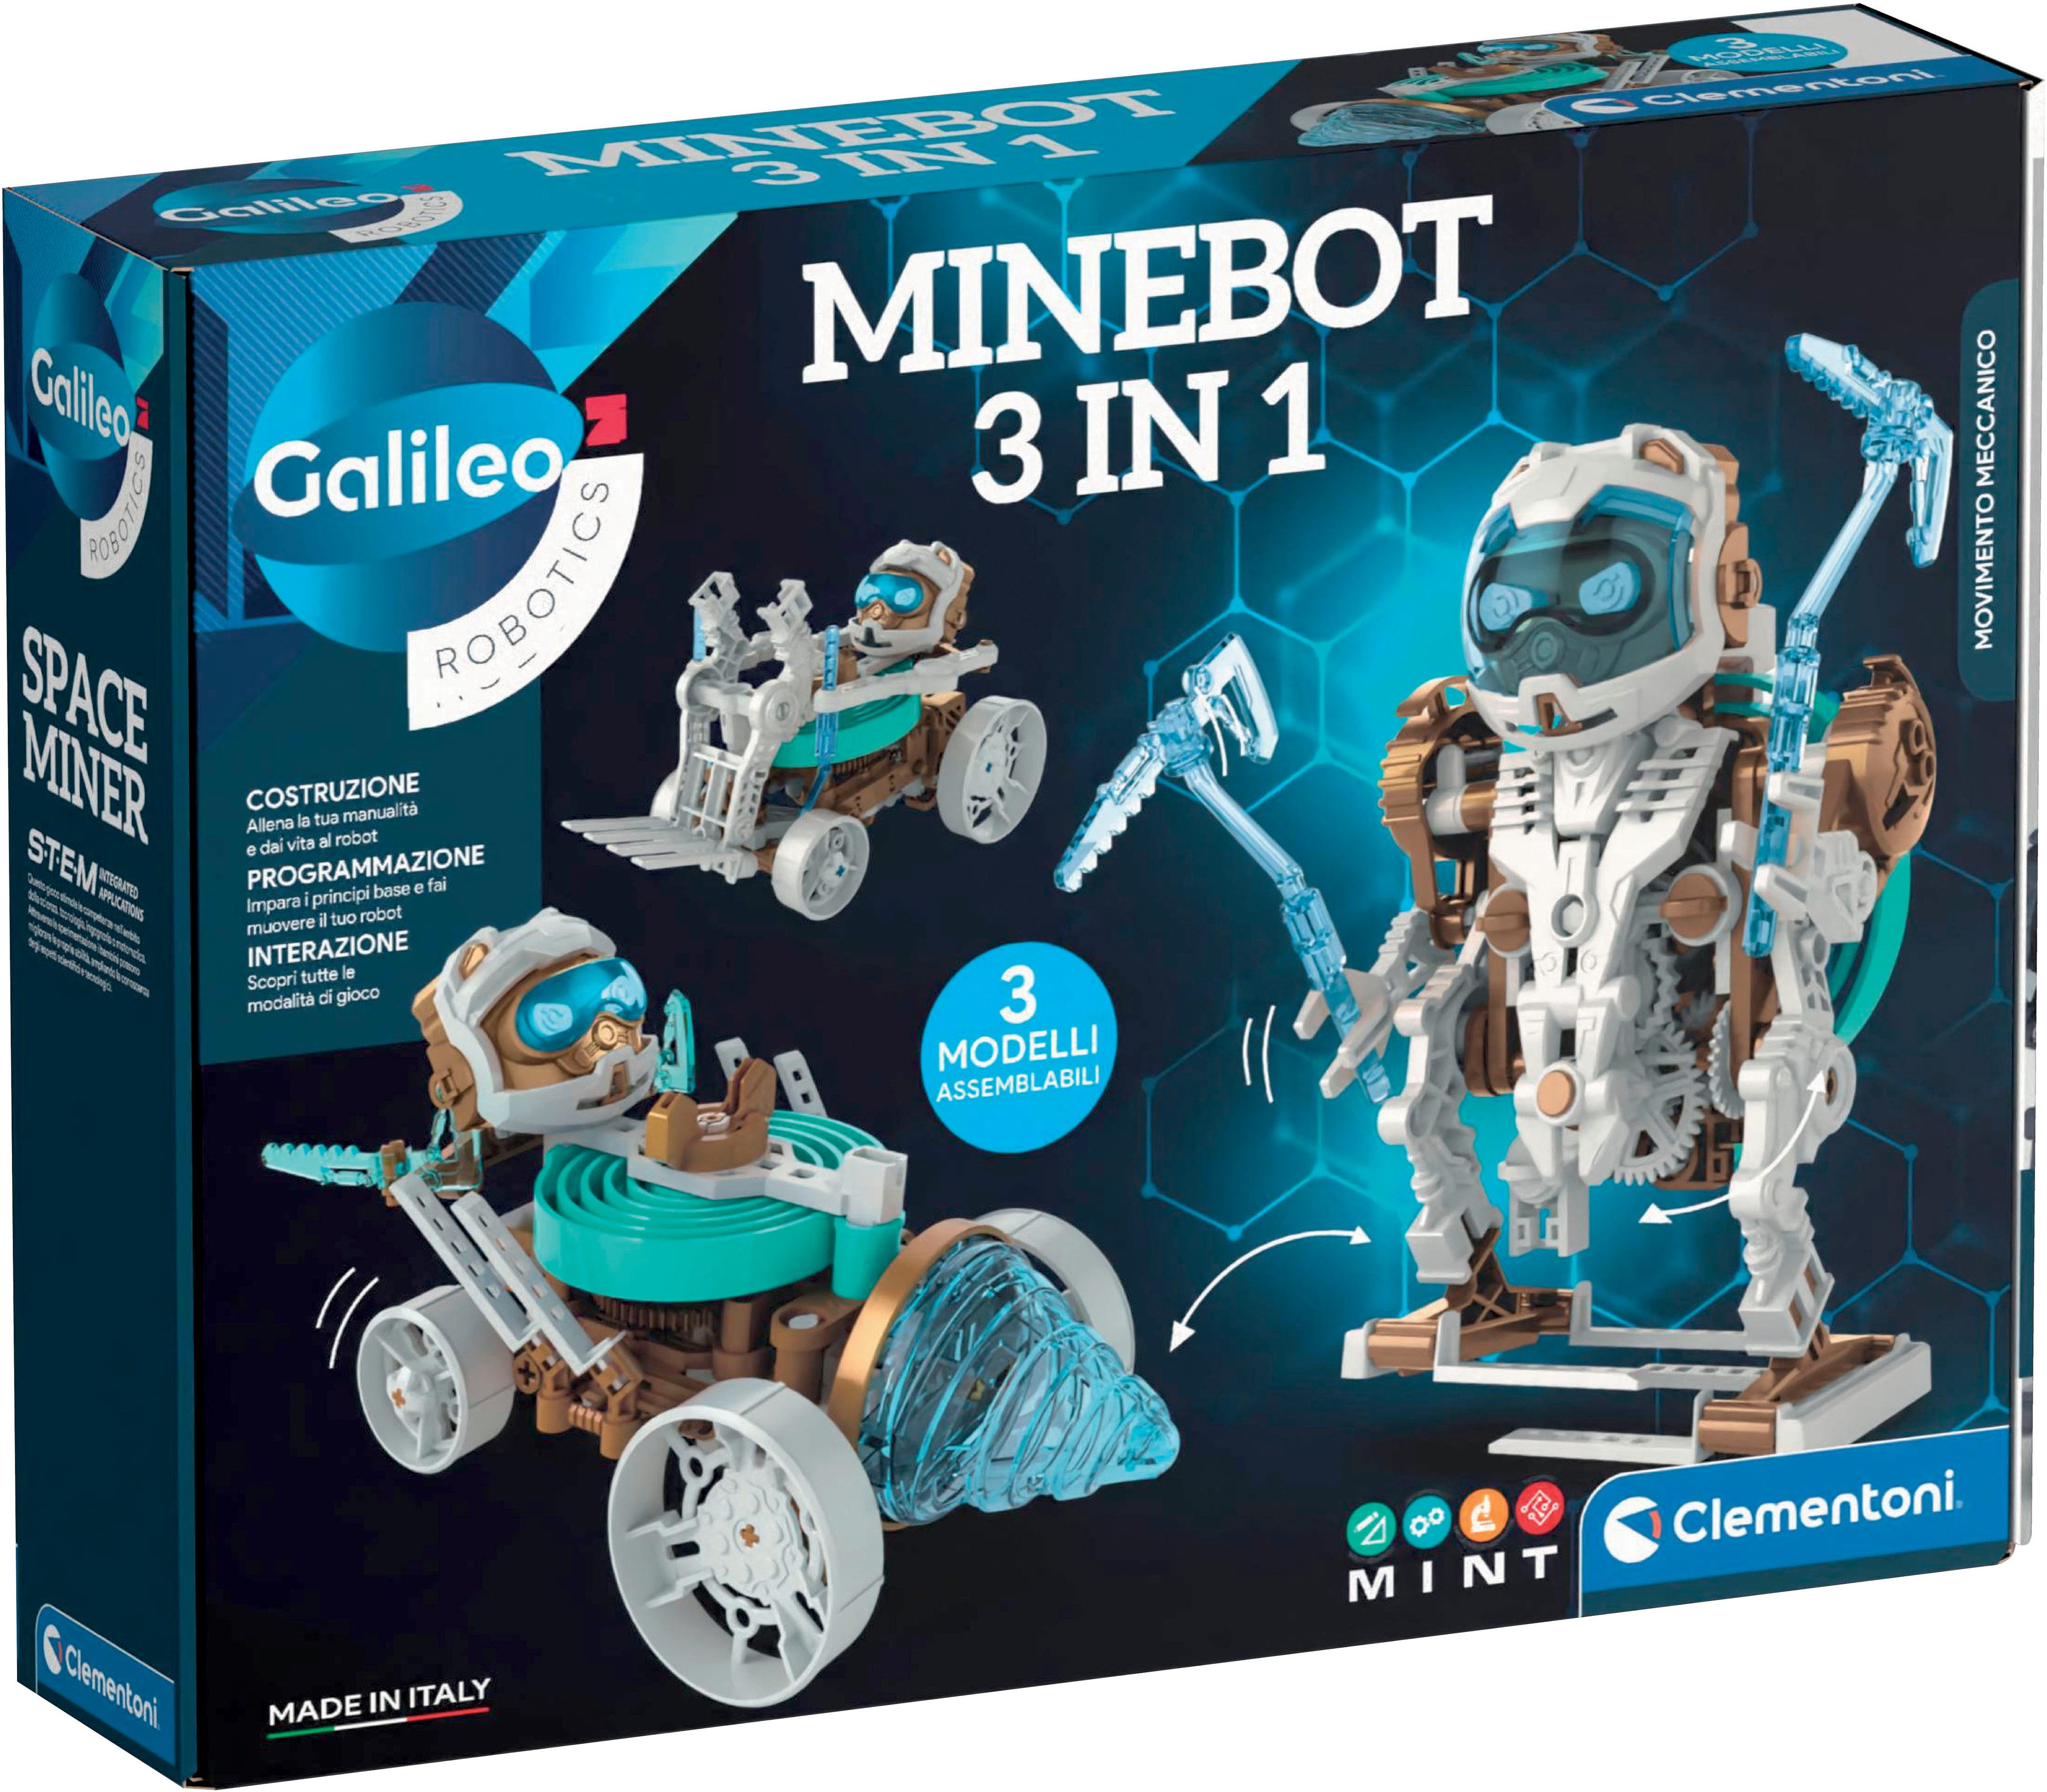 Clementoni® Roboter Galileo Robotics, MineBot 3in1, Made in Europe